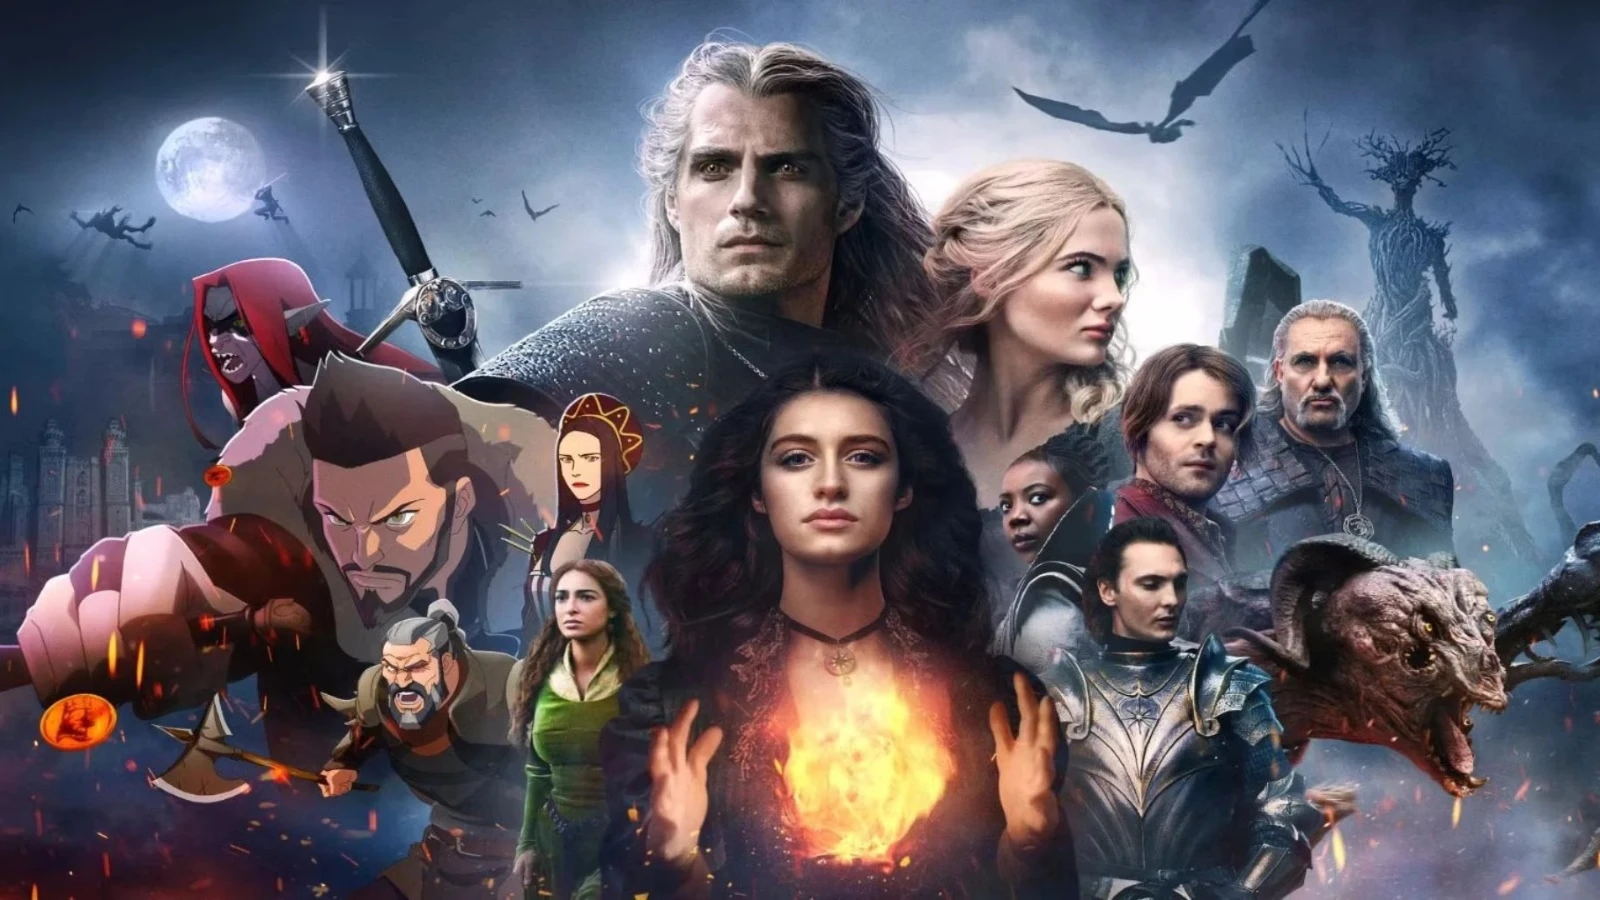 Every 'The Witcher' Movie and Series Coming to Netflix After Seson 3 -  What's on Netflix